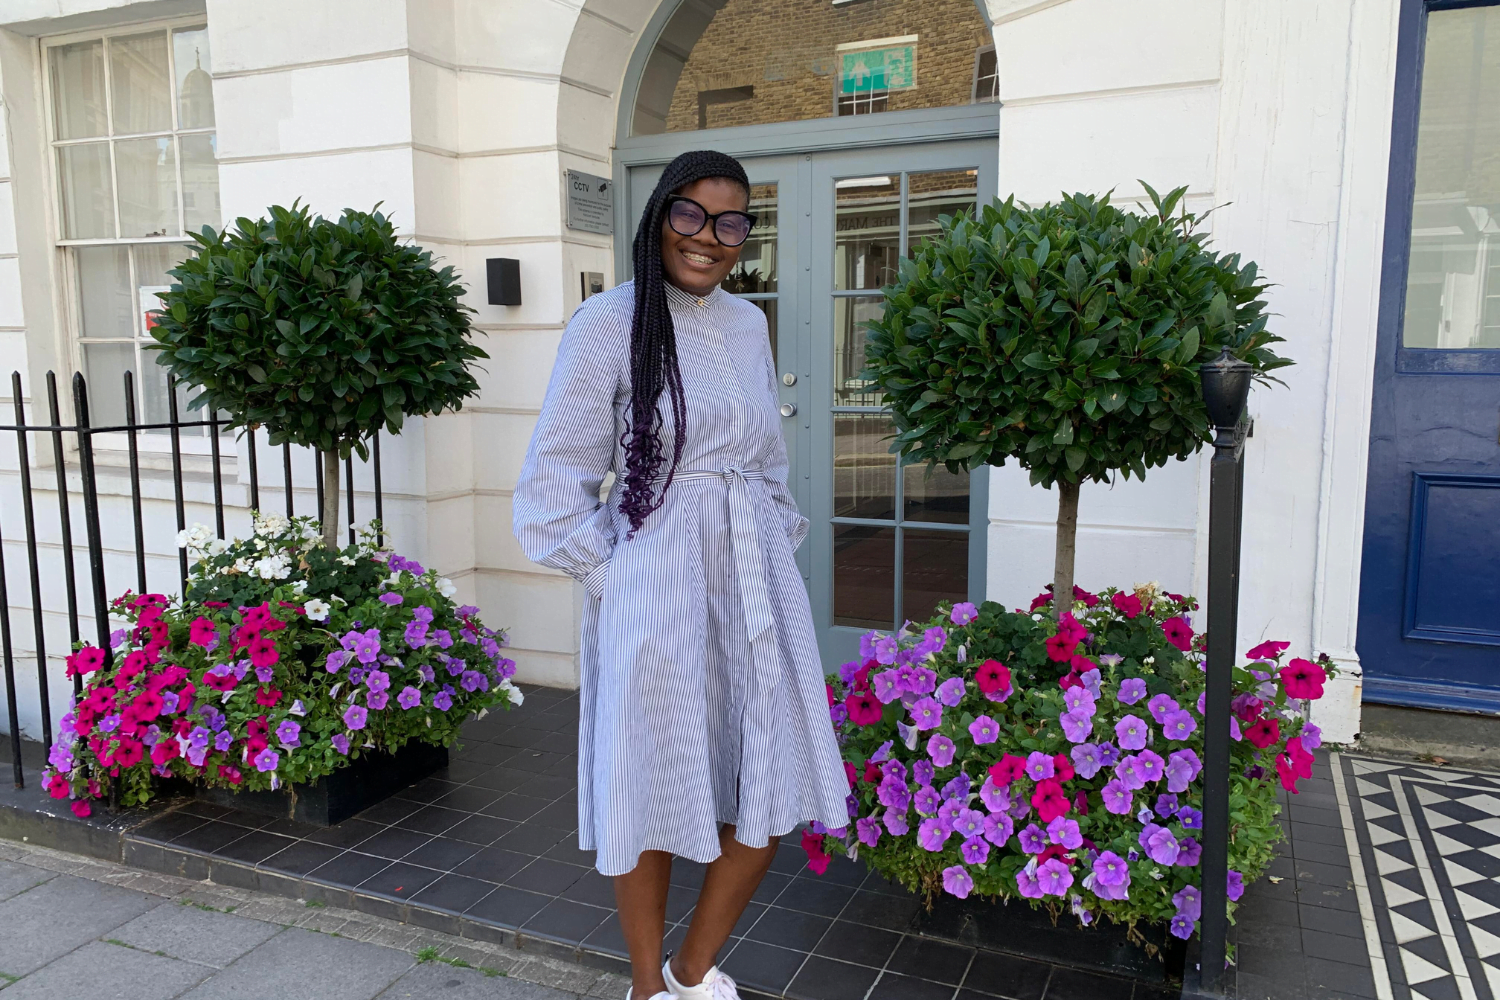 Marcia Skervin, Owner of Connect Your Dots, former mentee poses outside the Cherie Blair Foundation for Women's offices during a visit to London.